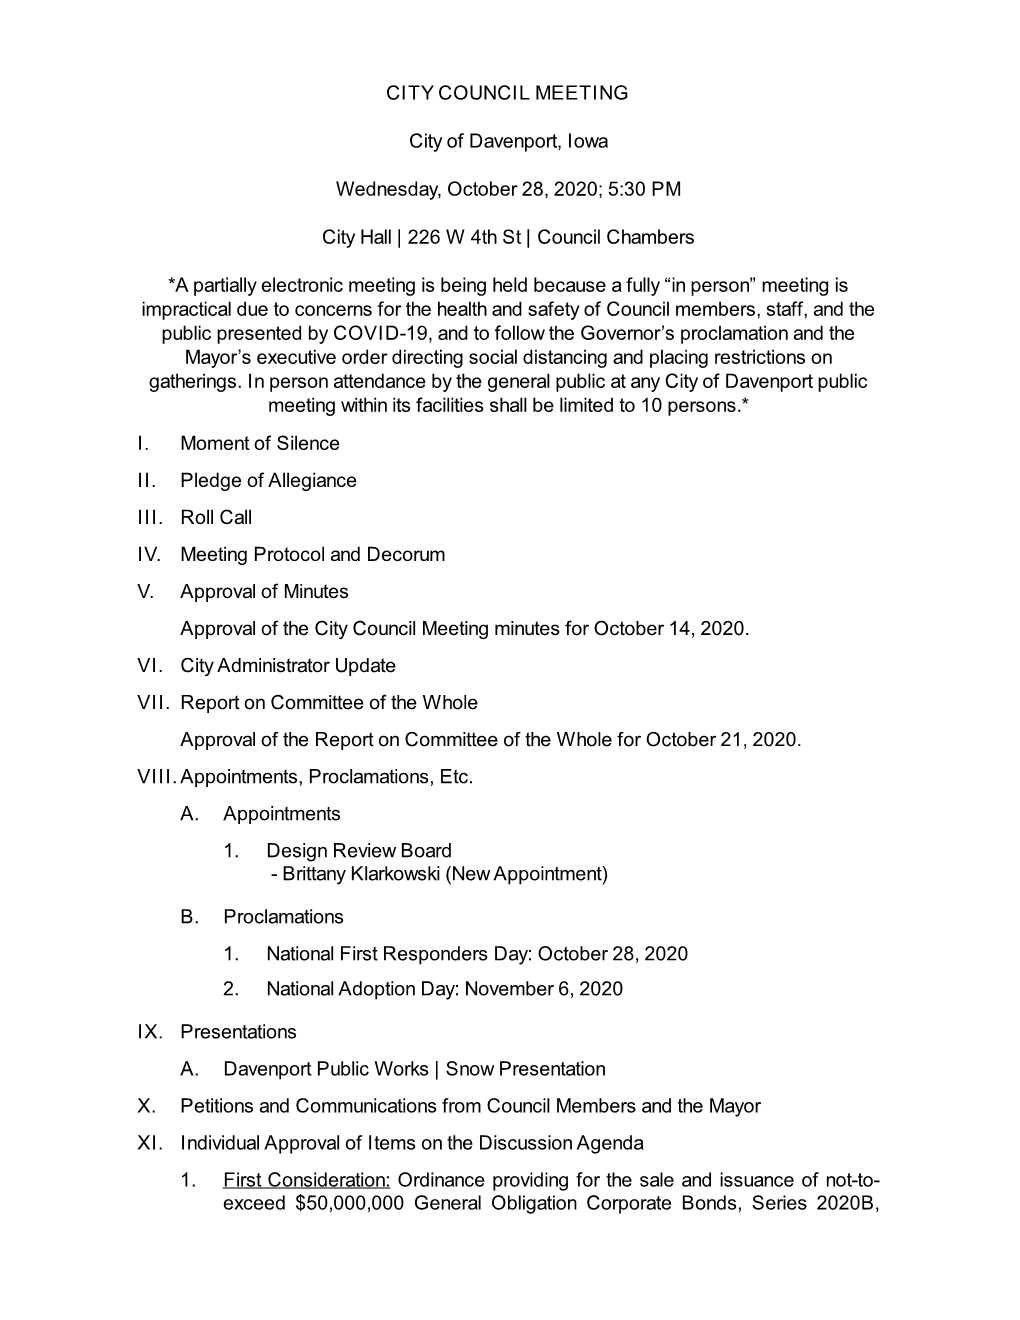 CITY COUNCIL MEETING City of Davenport, Iowa Wednesday, October 28, 2020; 5:30 PM City Hall | 226 W 4Th St | Council Chambers *A